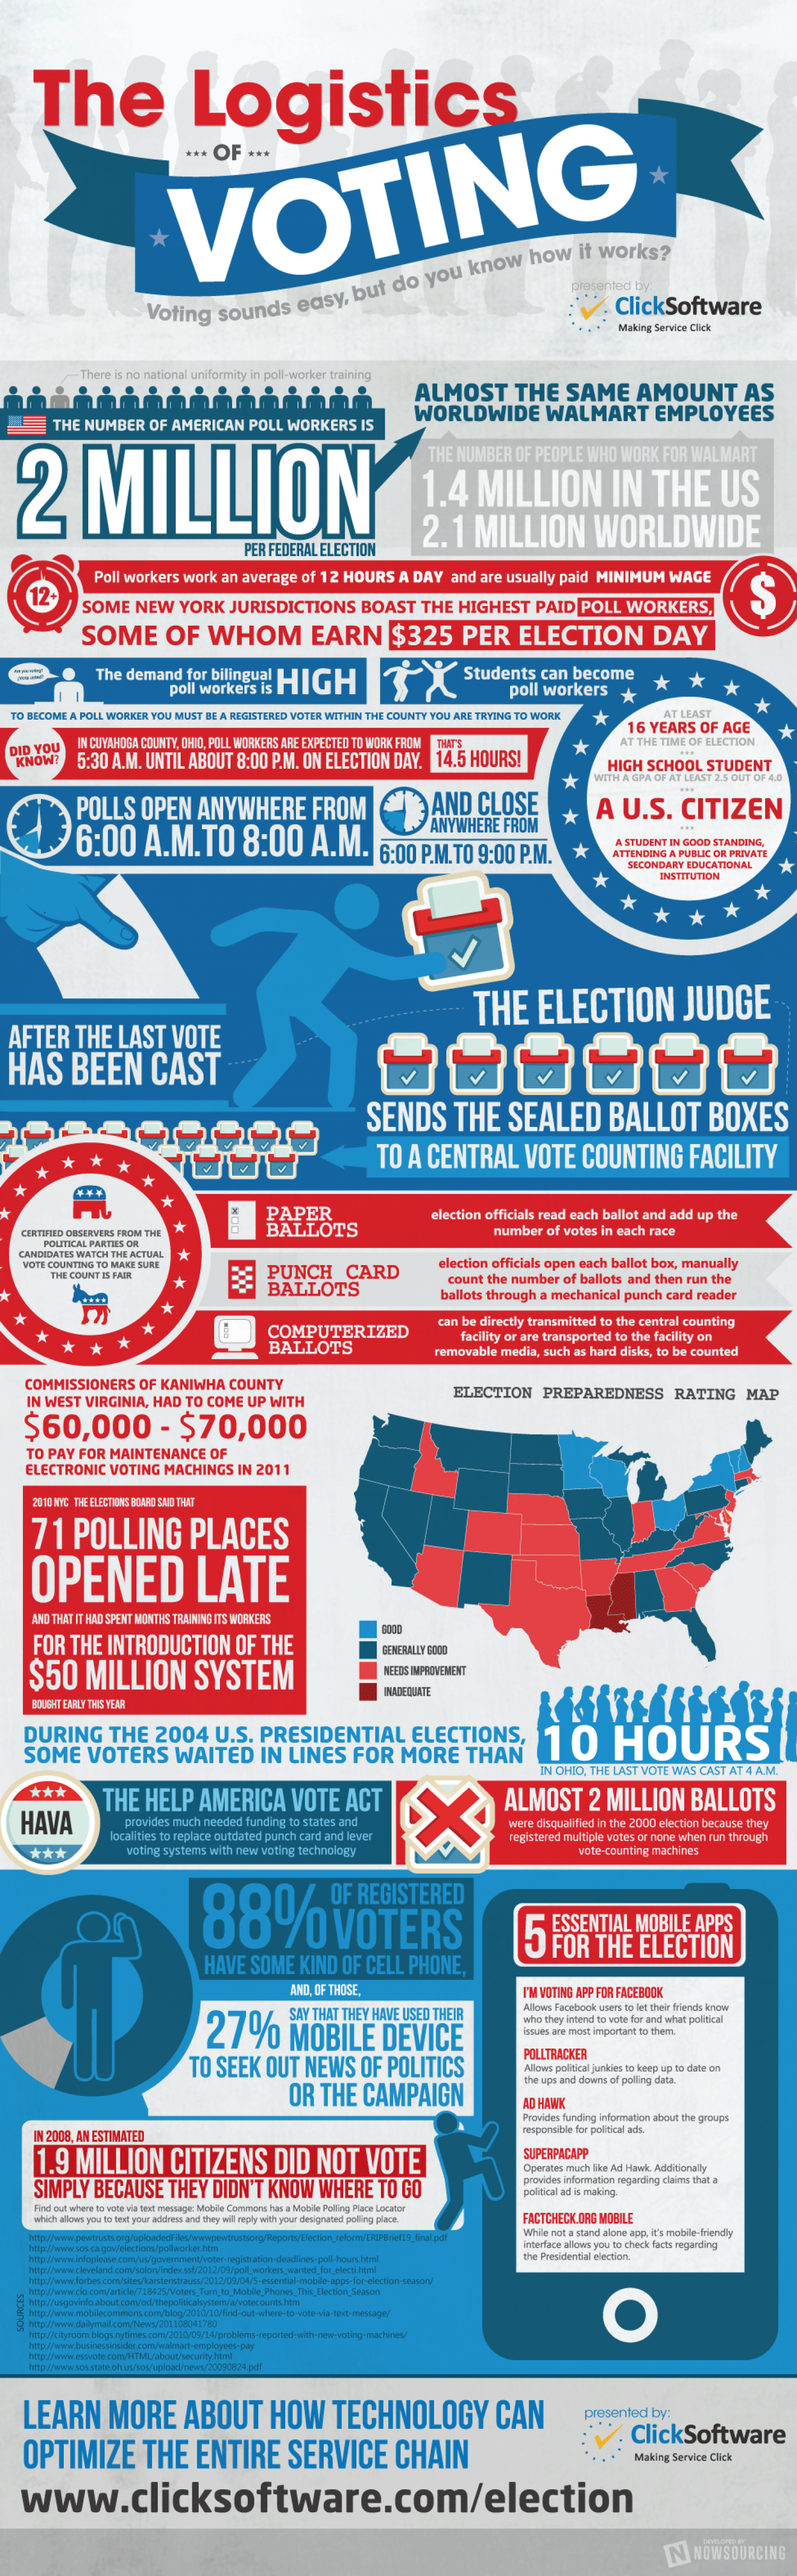 The Logistics of Voting Infographic